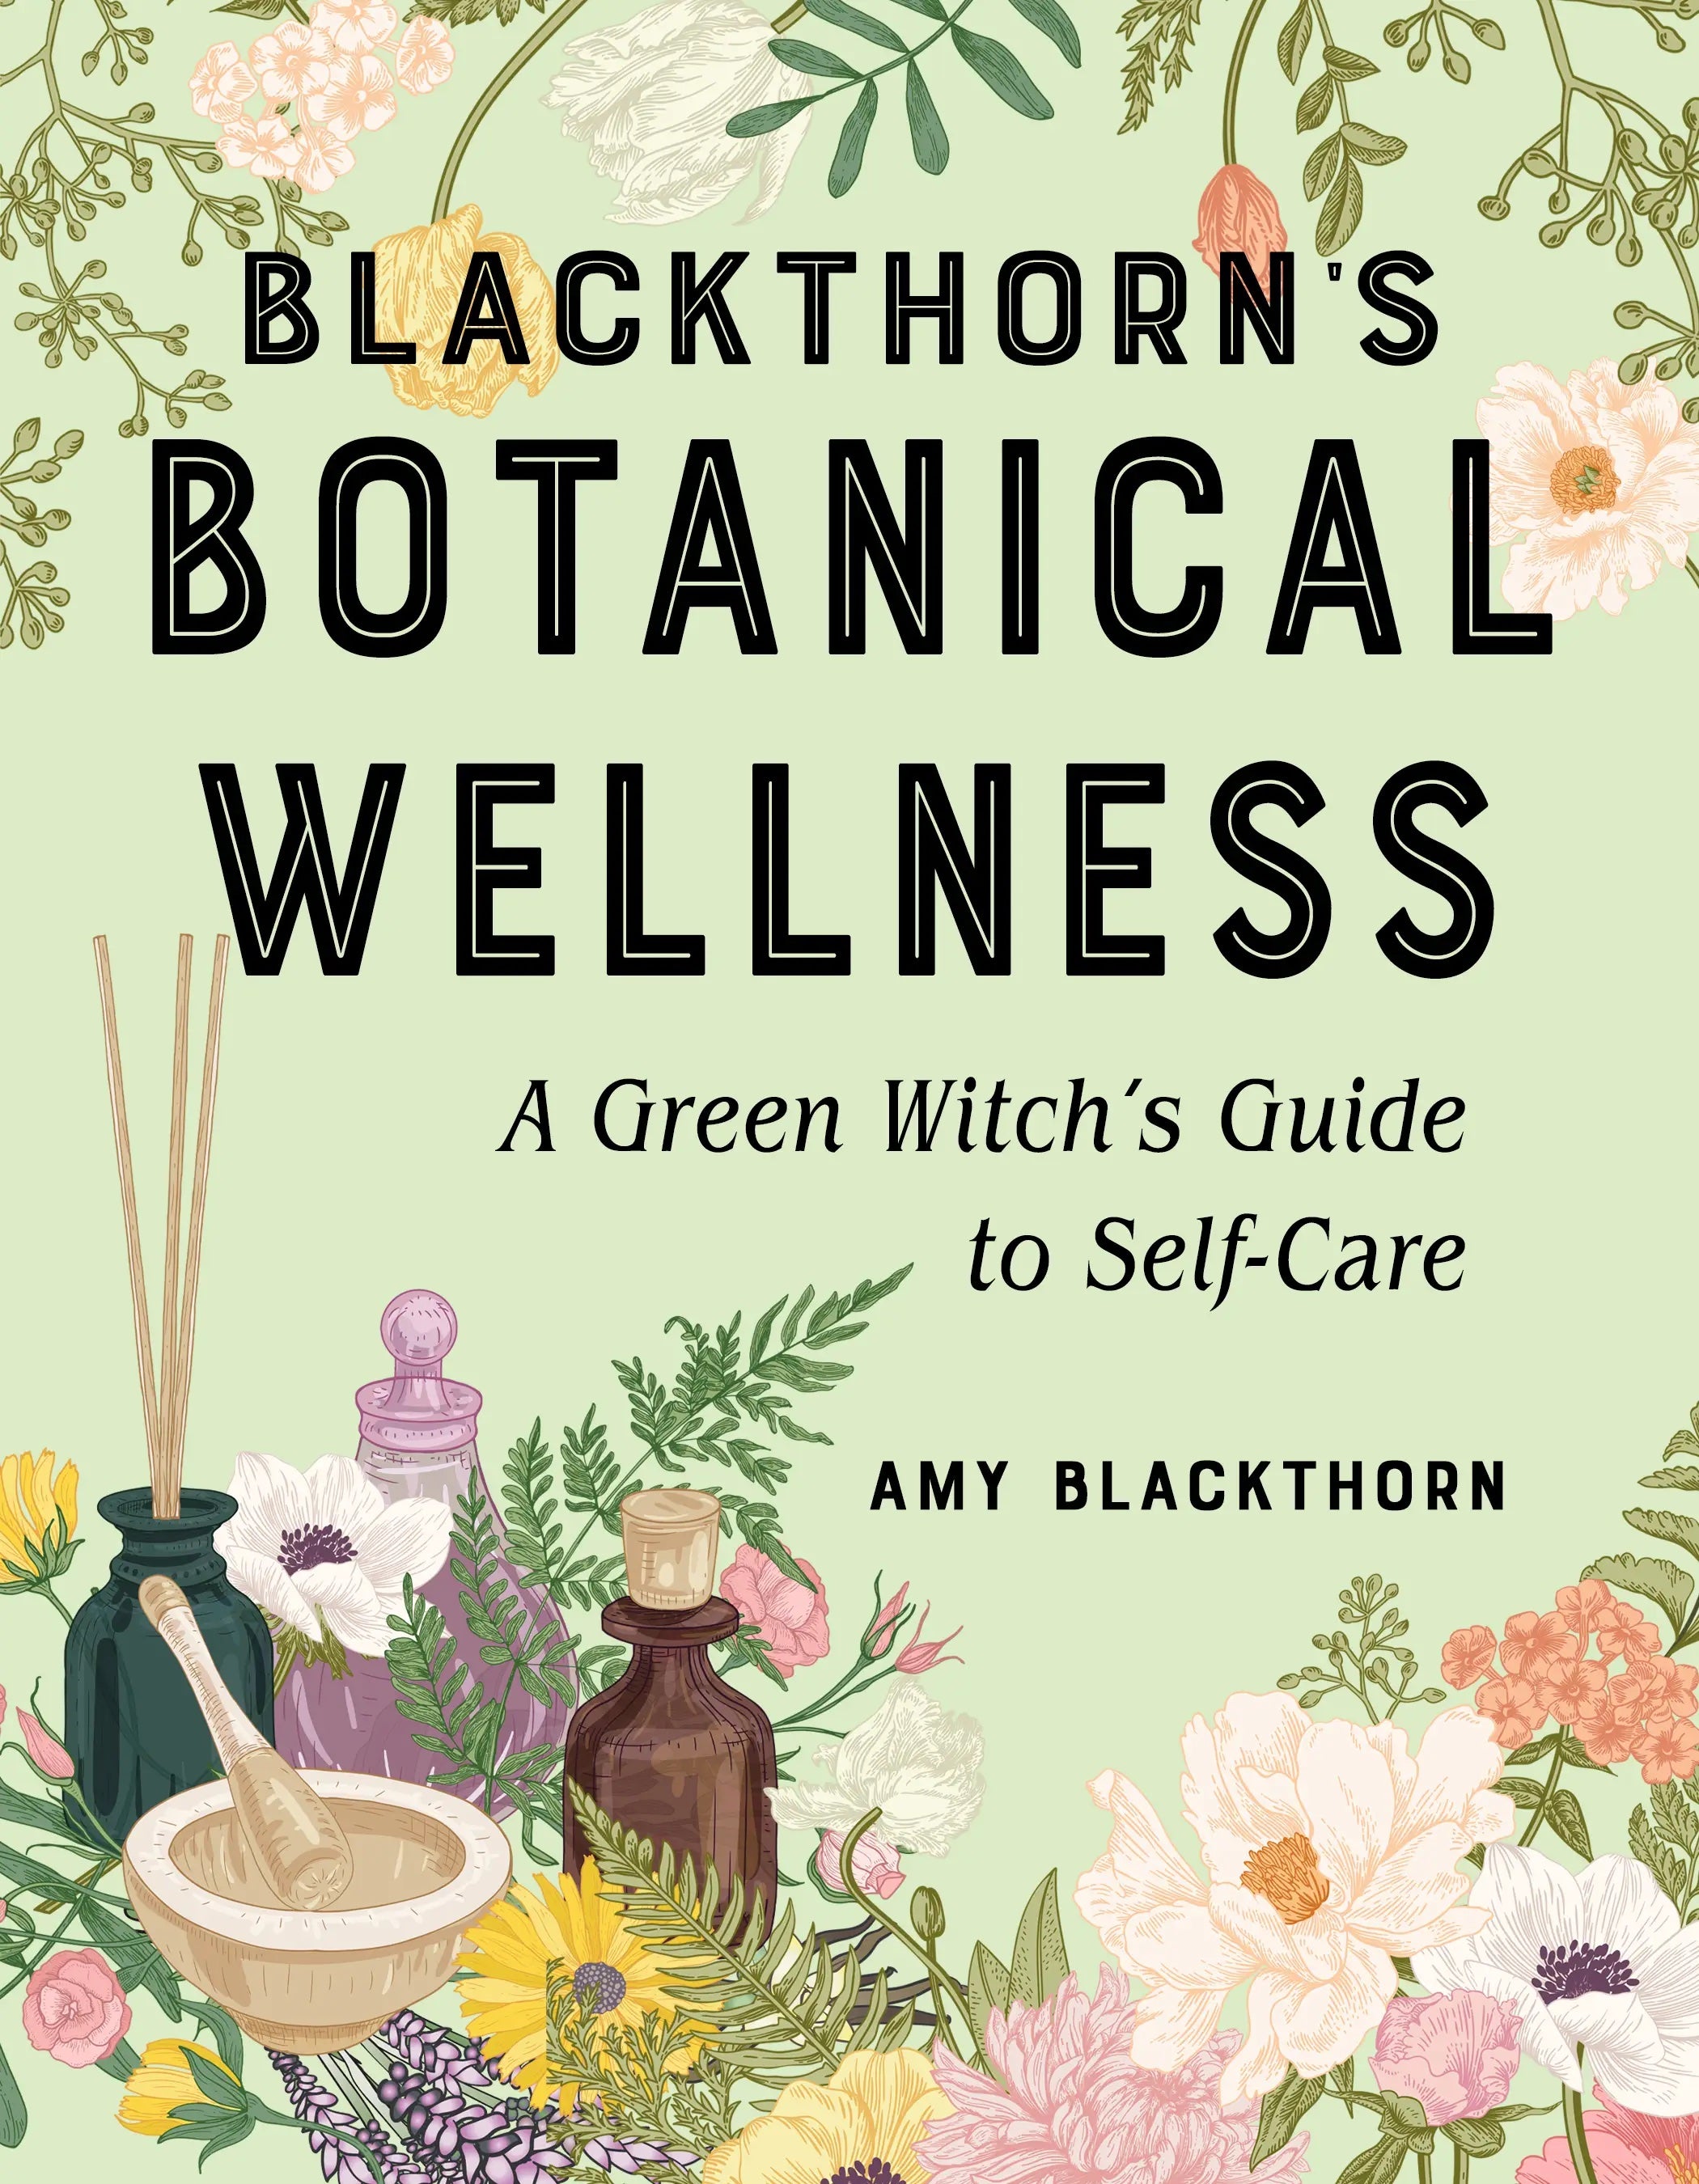 Blackthorn's Botanical Wellness: A Green Witch’s Guide to Self Care